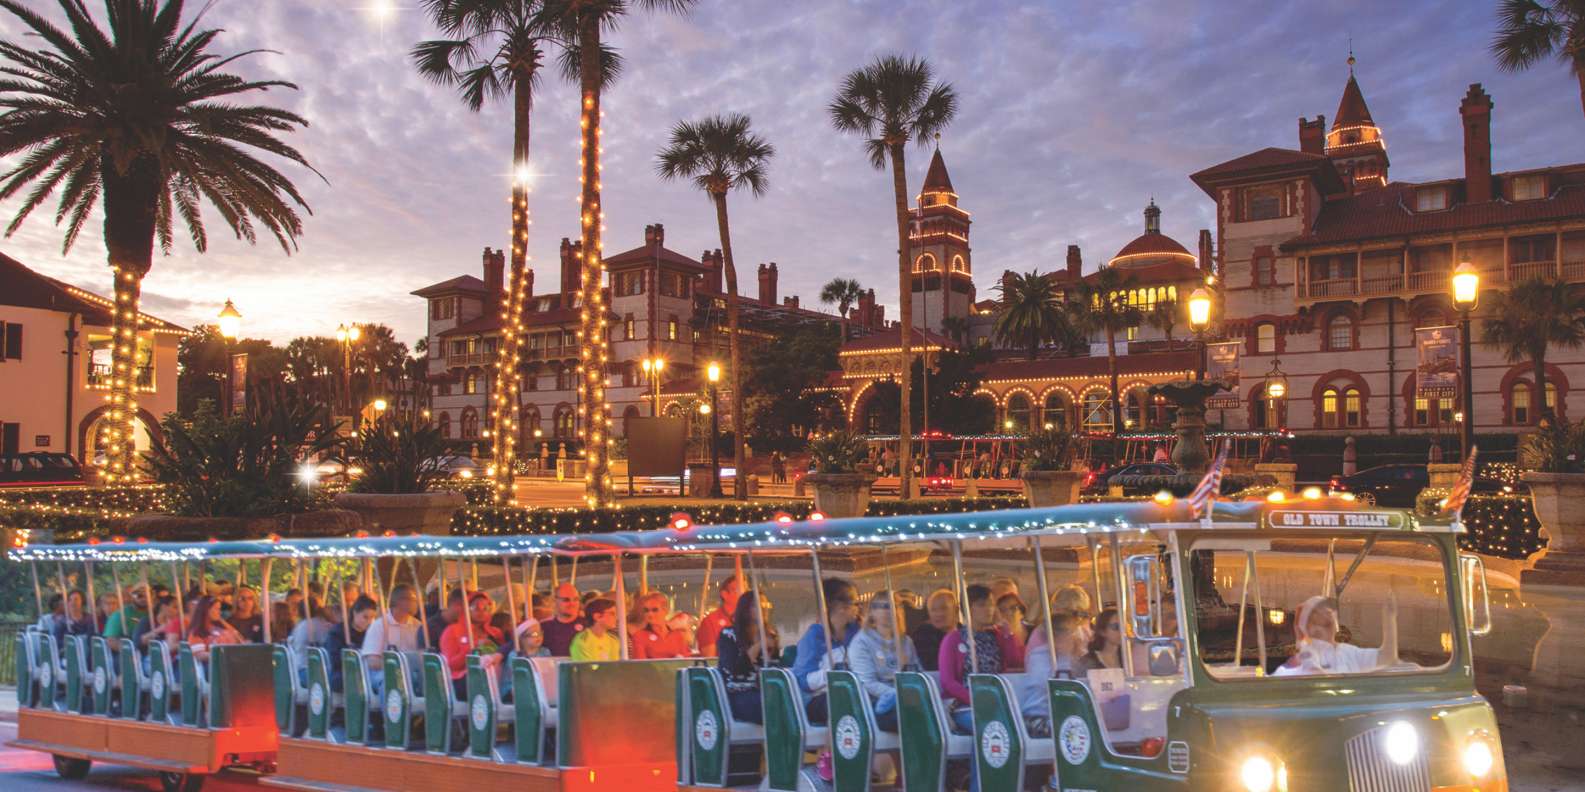 What to do in St. Augustine, Florida